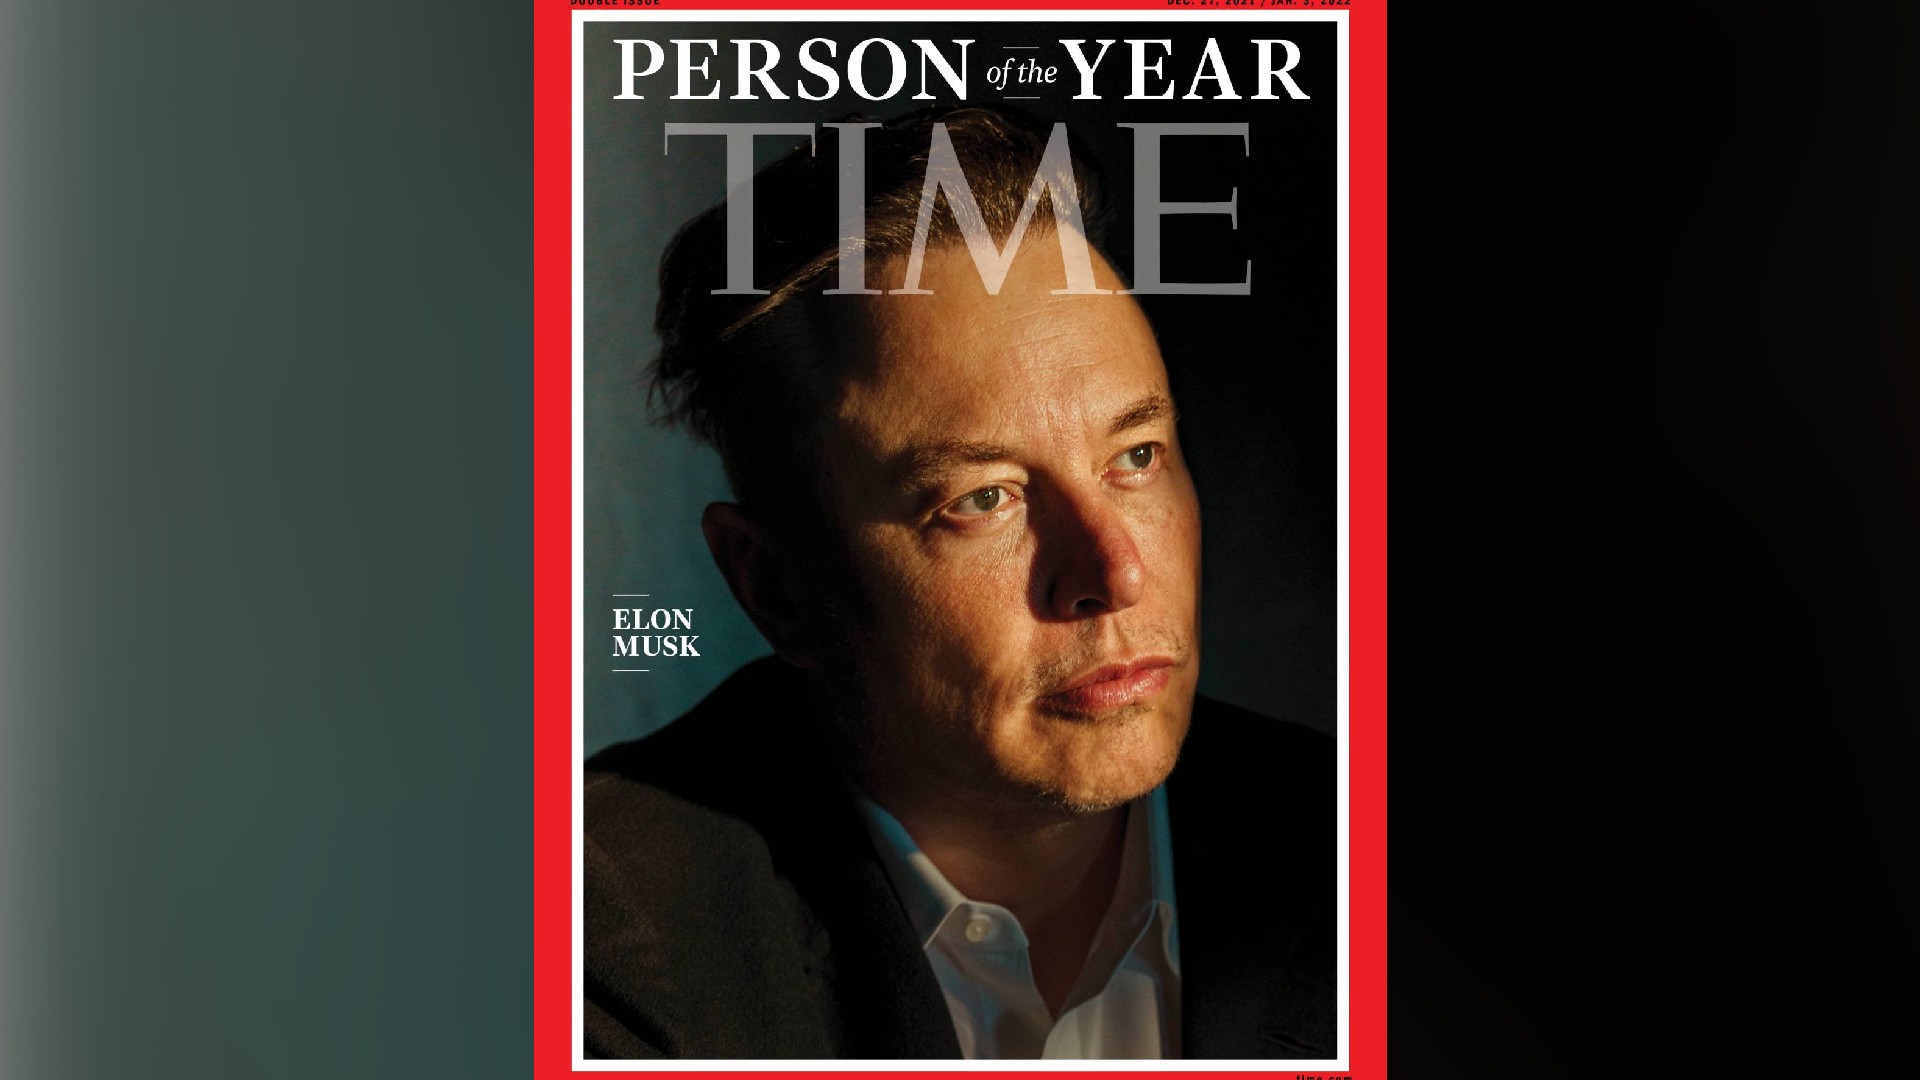 Elon Musk is Time magazine’s Person of the Year